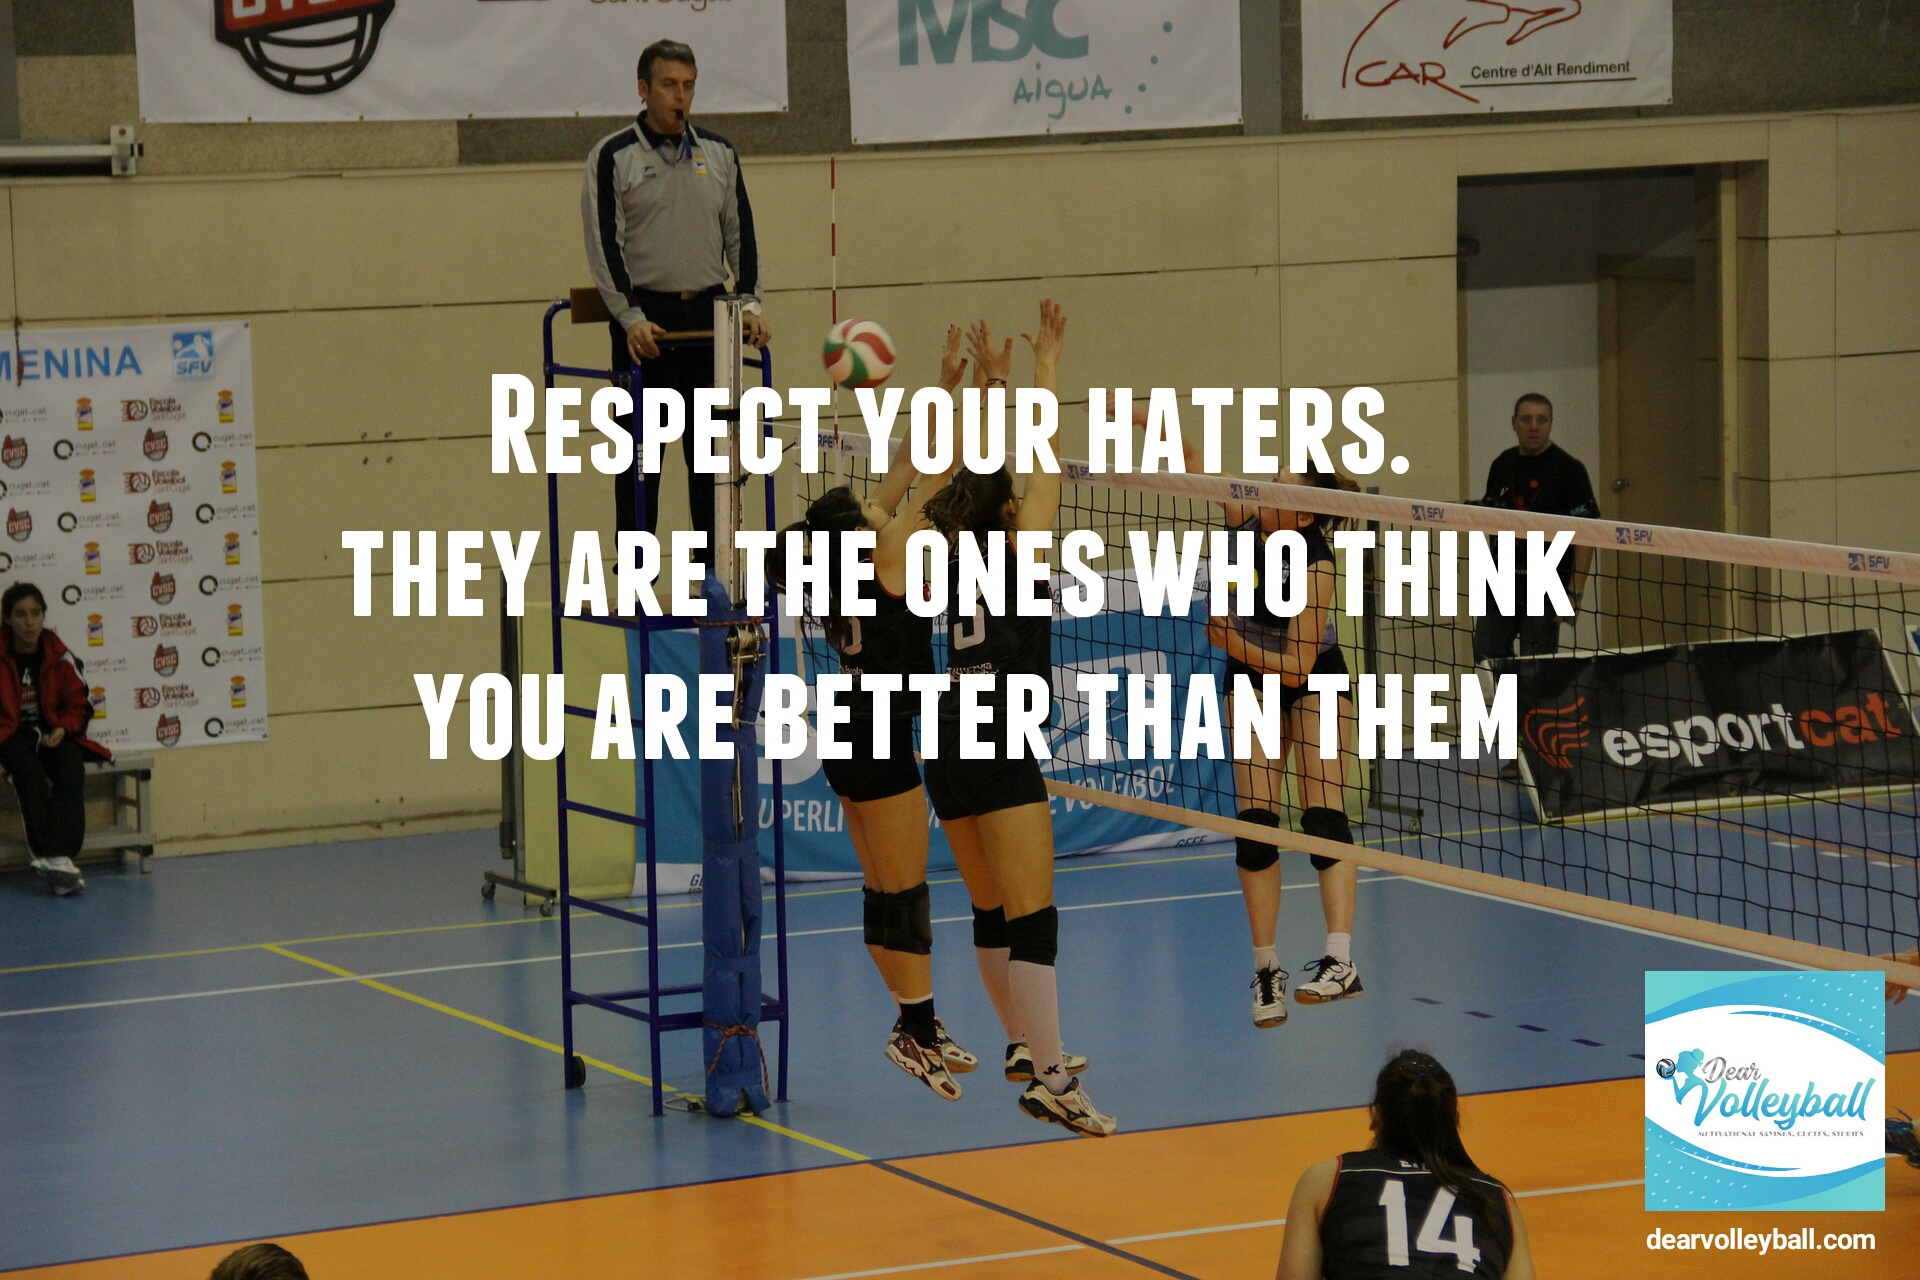 Respect your haters. They are the ones who think you are better than them.